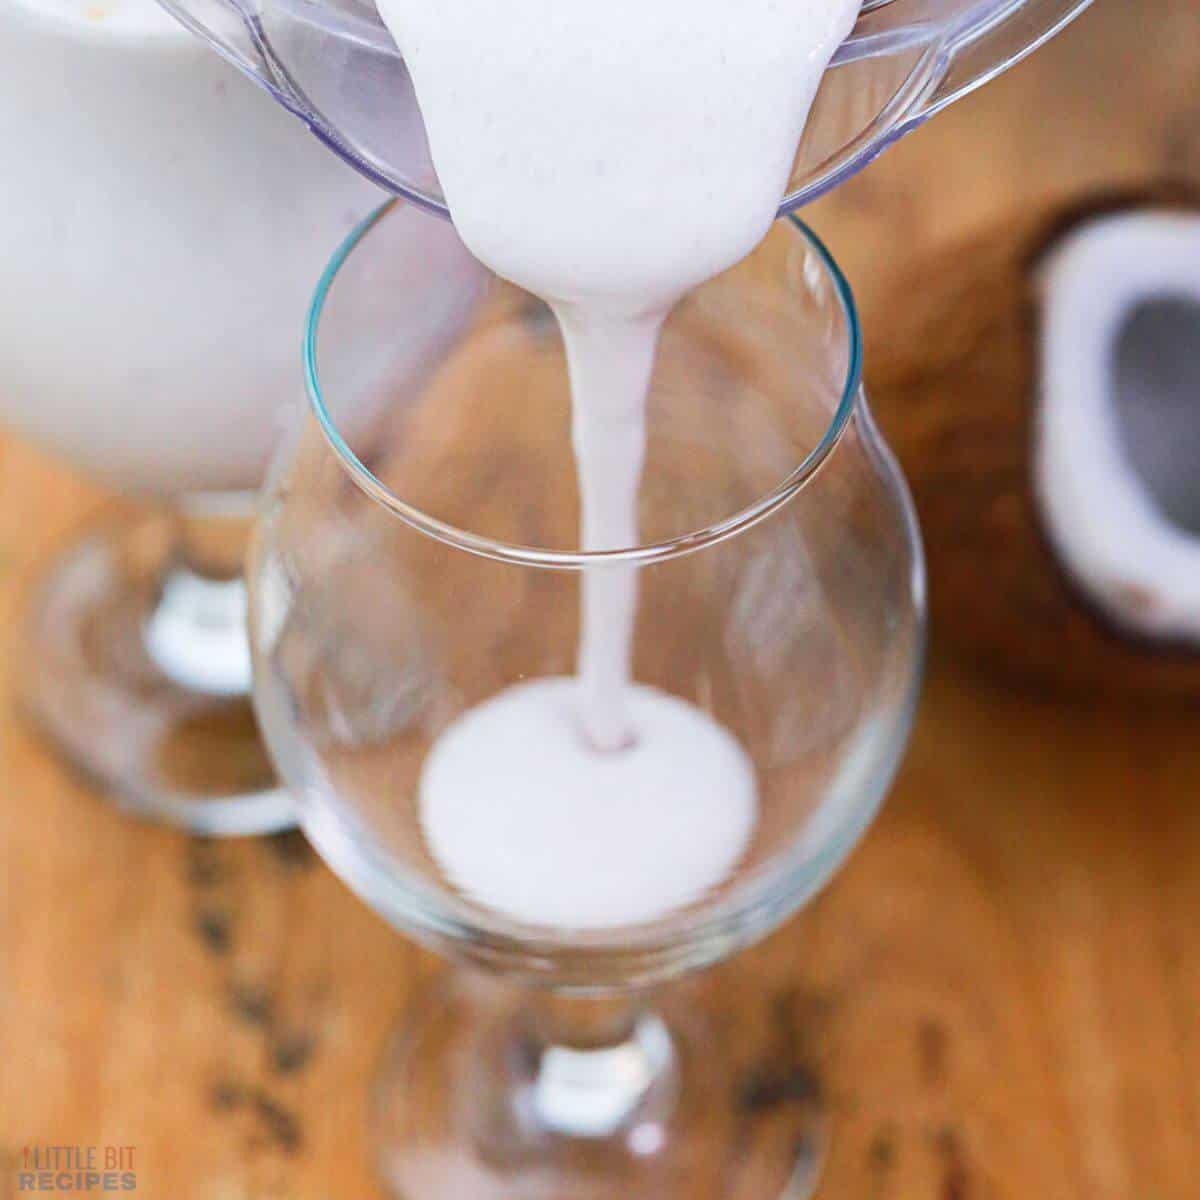 pouring the shake into a glass.